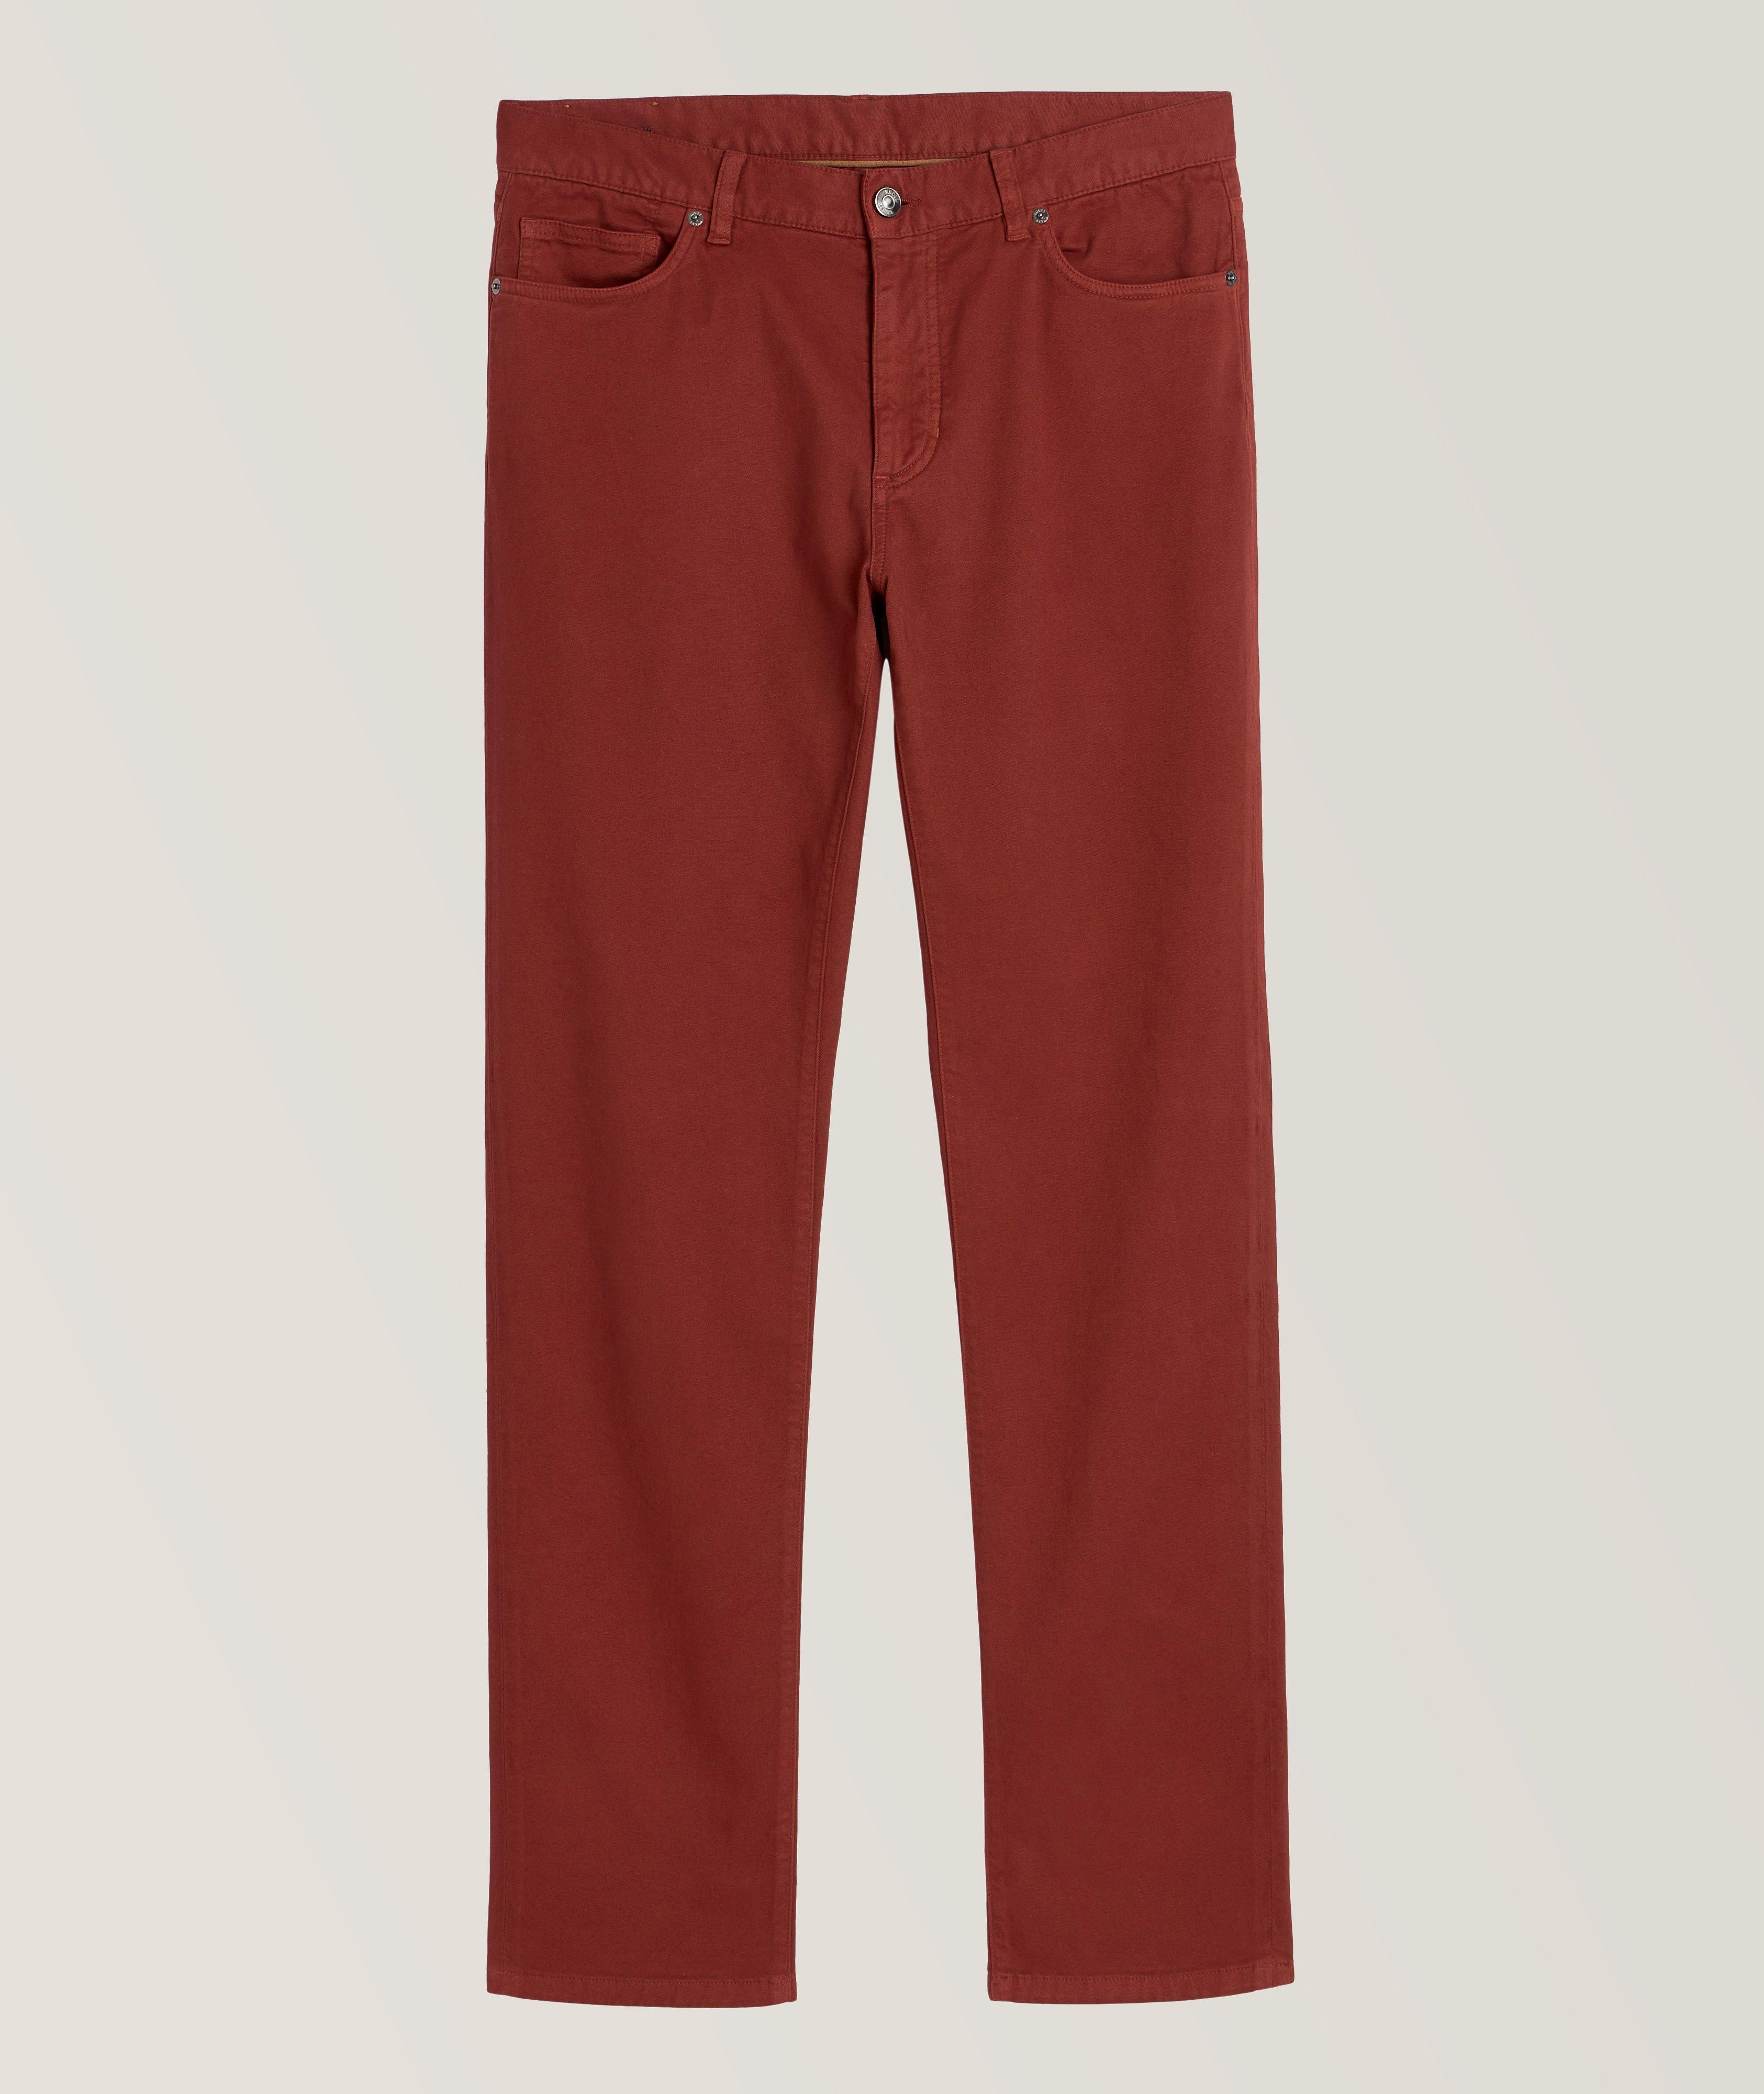 A New Day NWT Women's 8 Burgundy Stretch High Rise Straight Chino Pants